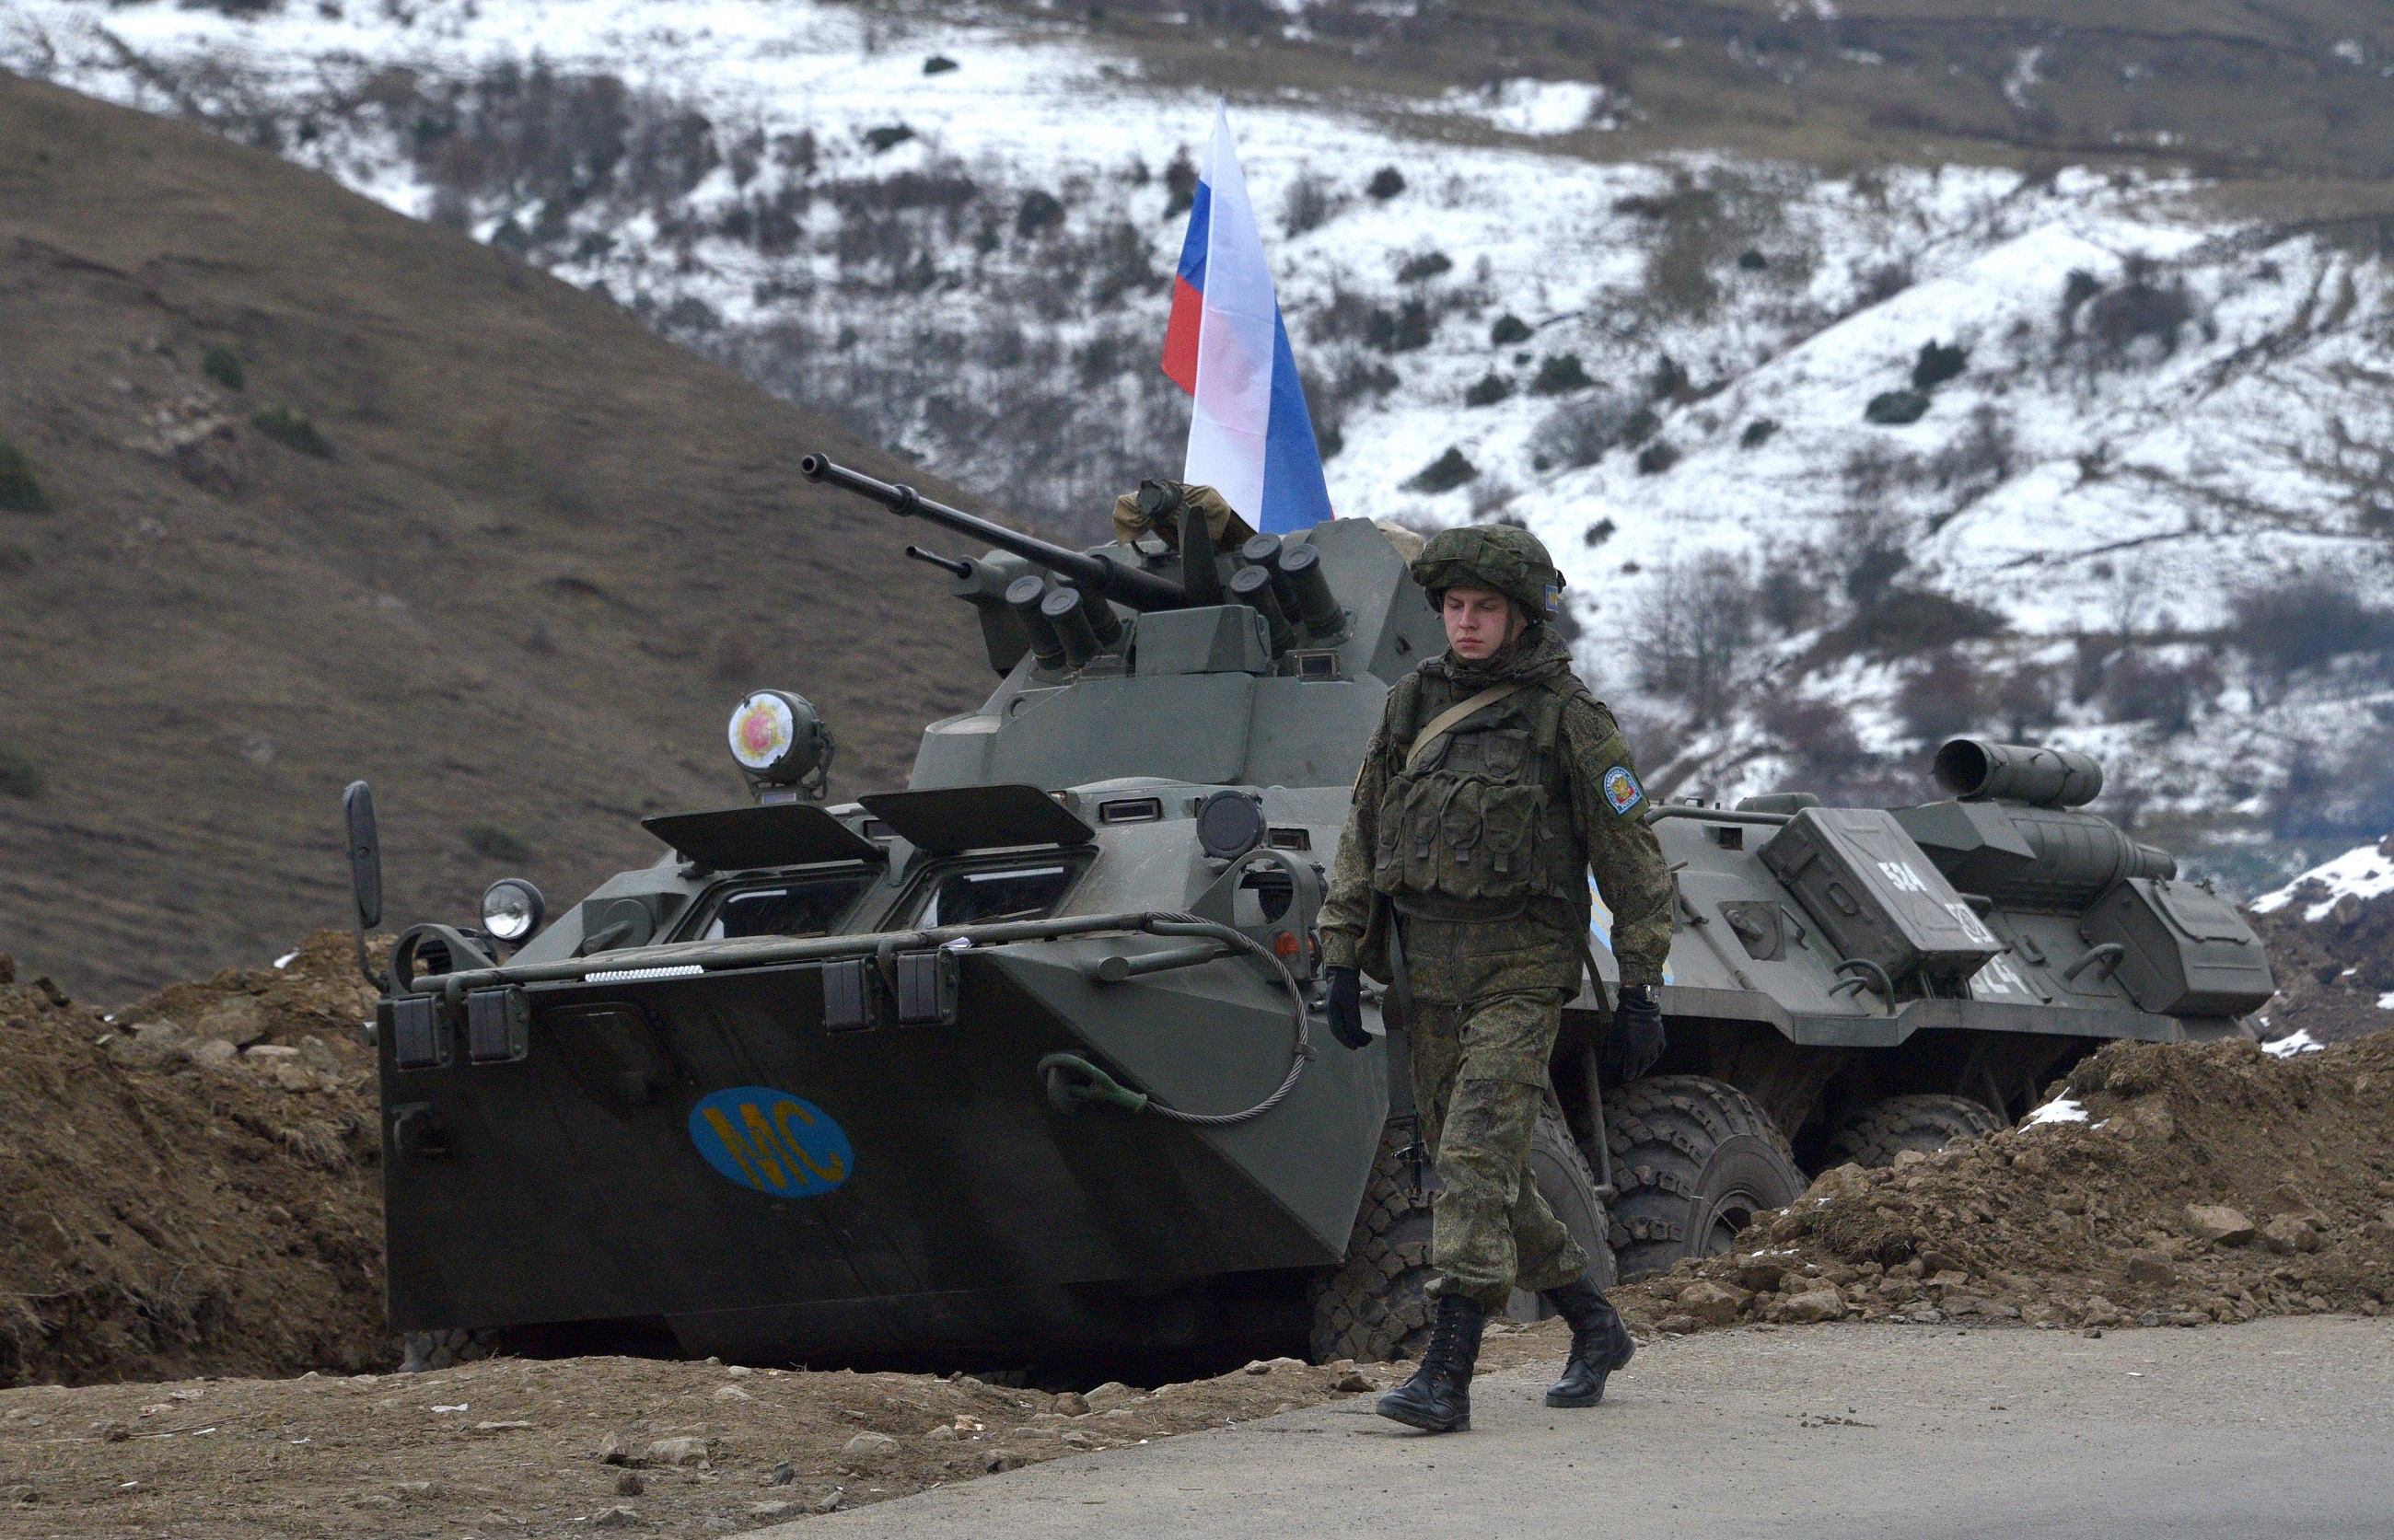 Russian soldiers of the peacekeeping force man a checkpoint on a road outside the town of Stepanakert on November 26, 2020, after six weeks of fighting between Armenia and Azerbaijan over the disputed Nagorno-Karabakh region.